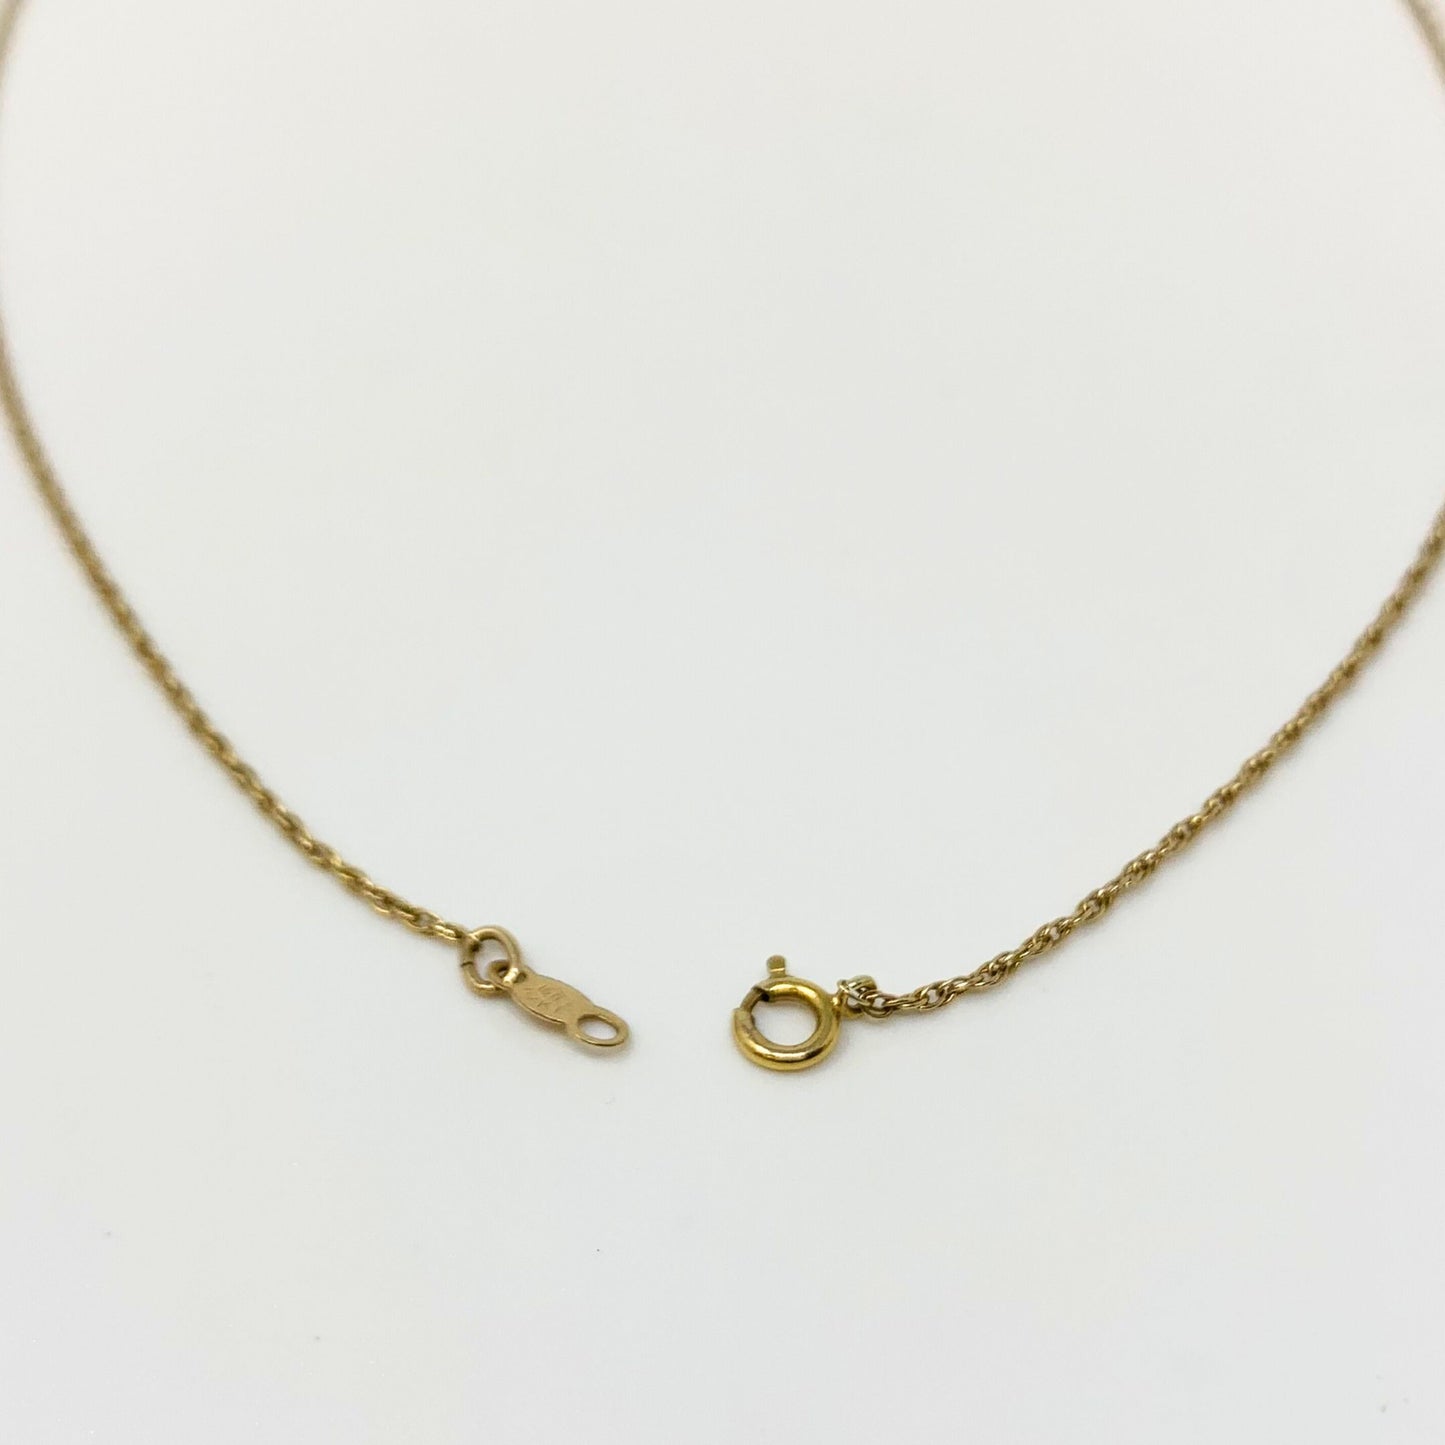 14K Gold 18” Bead Slide Wheat Necklace